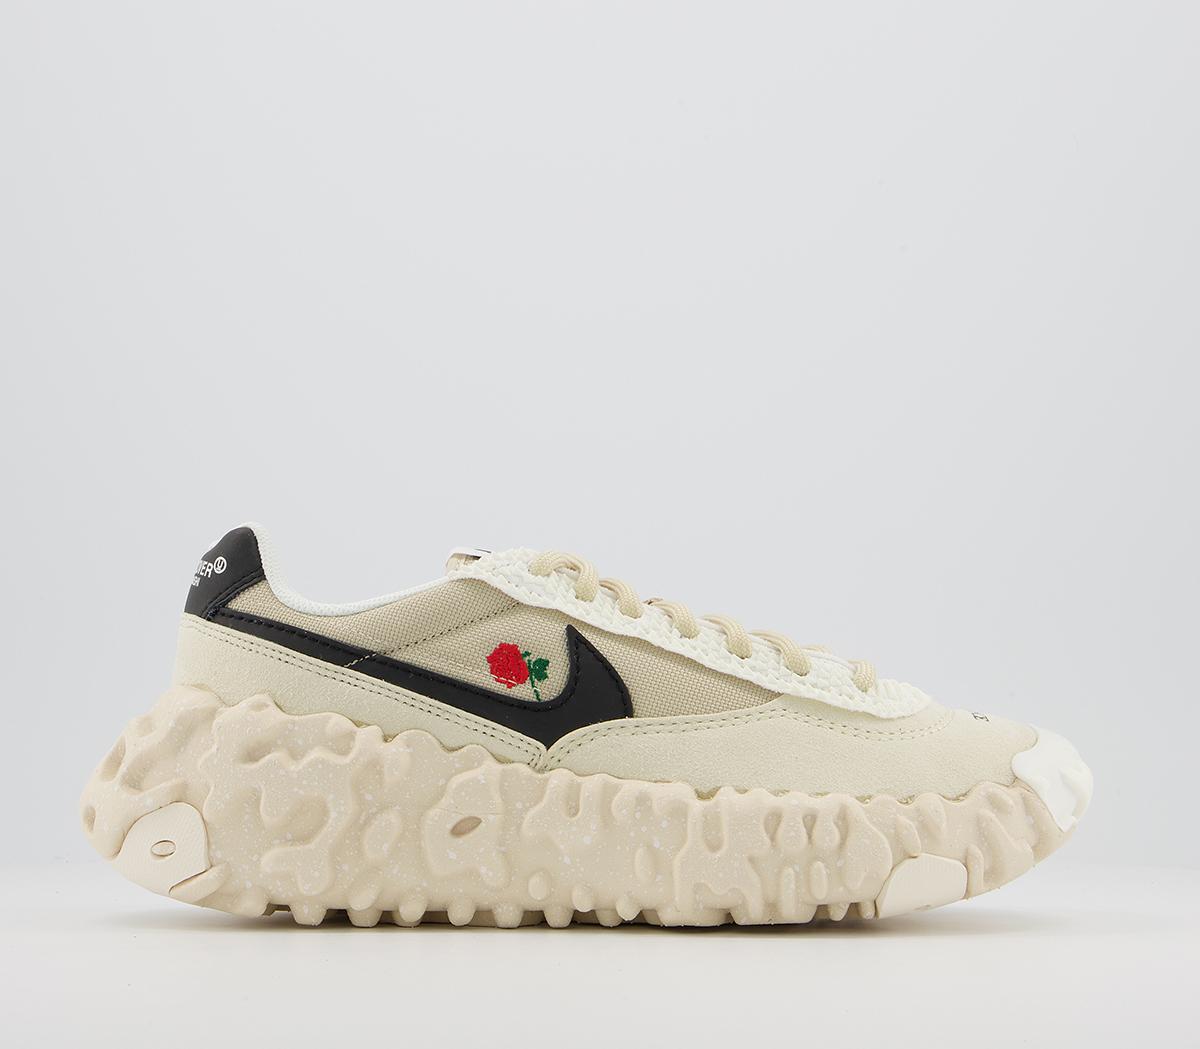 NikeOverbreak TrainersUndercover Overcast Black Fossil Sail